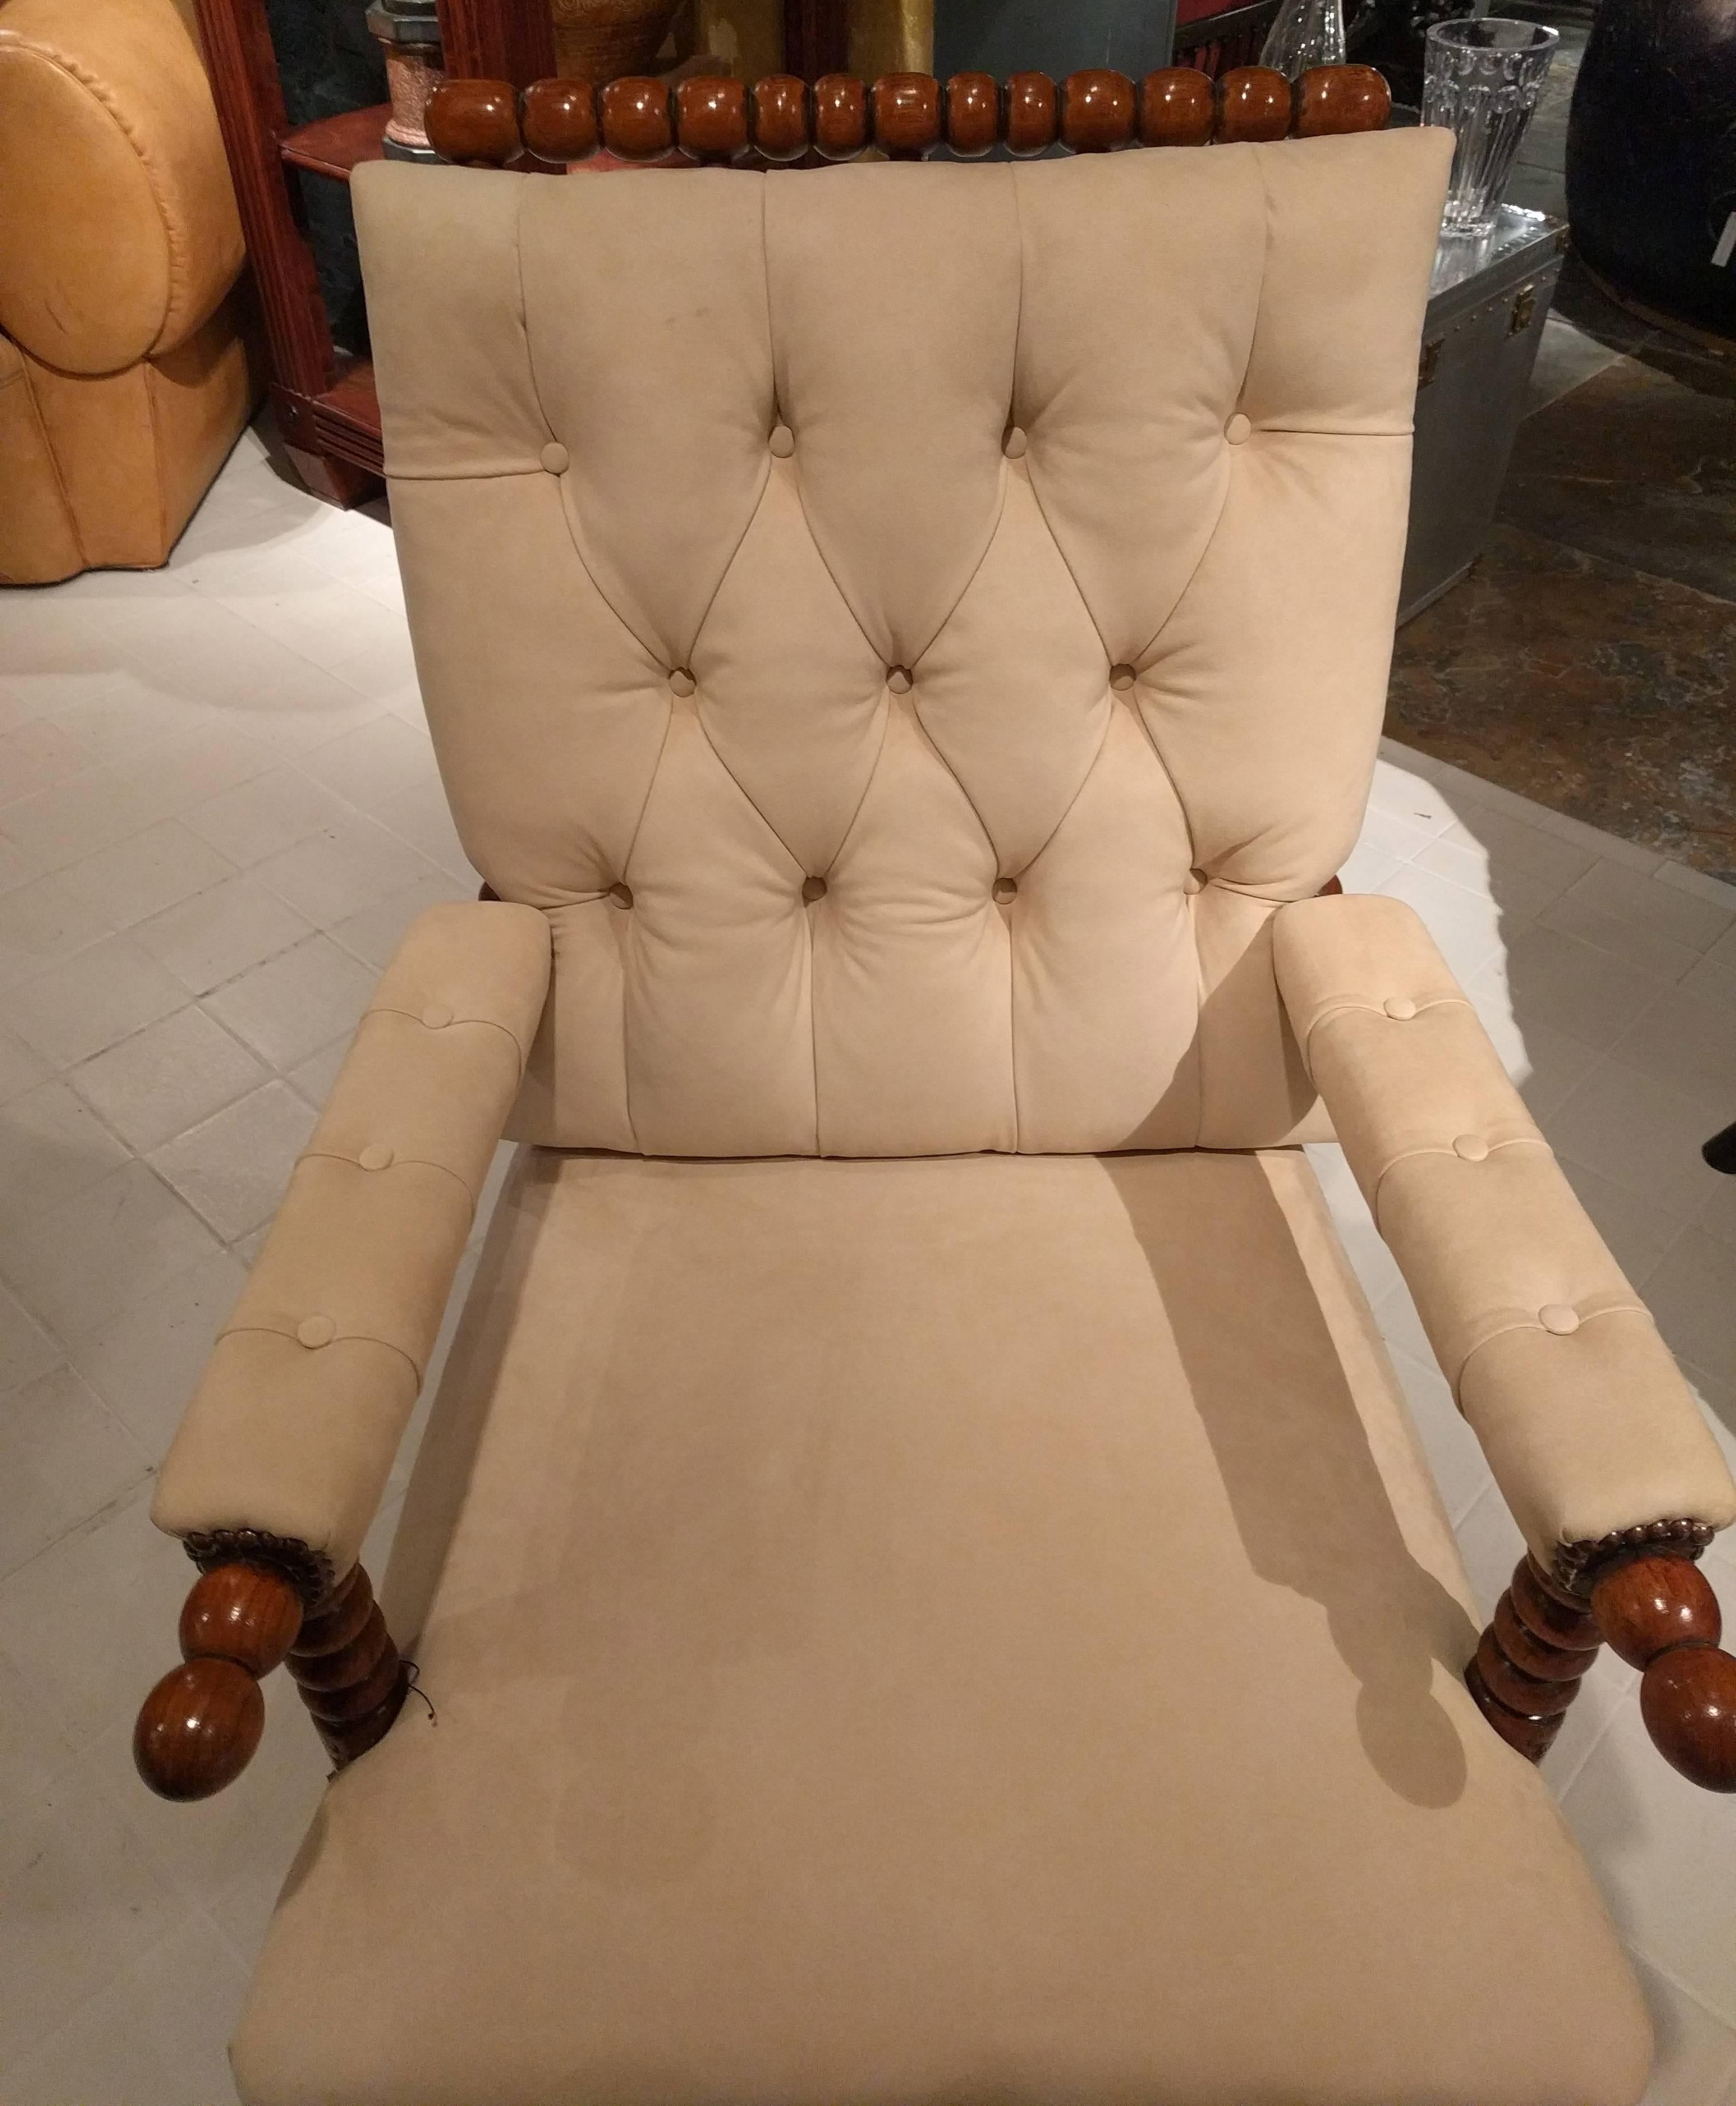 Matched pair of Danish bobbin turned spindle backed beech armchairs, circa1850. The chair's apron with a repetition of the bobbin carving featured throughout the legs and arms, upholstered in cream colored suede finished with antiqued brass